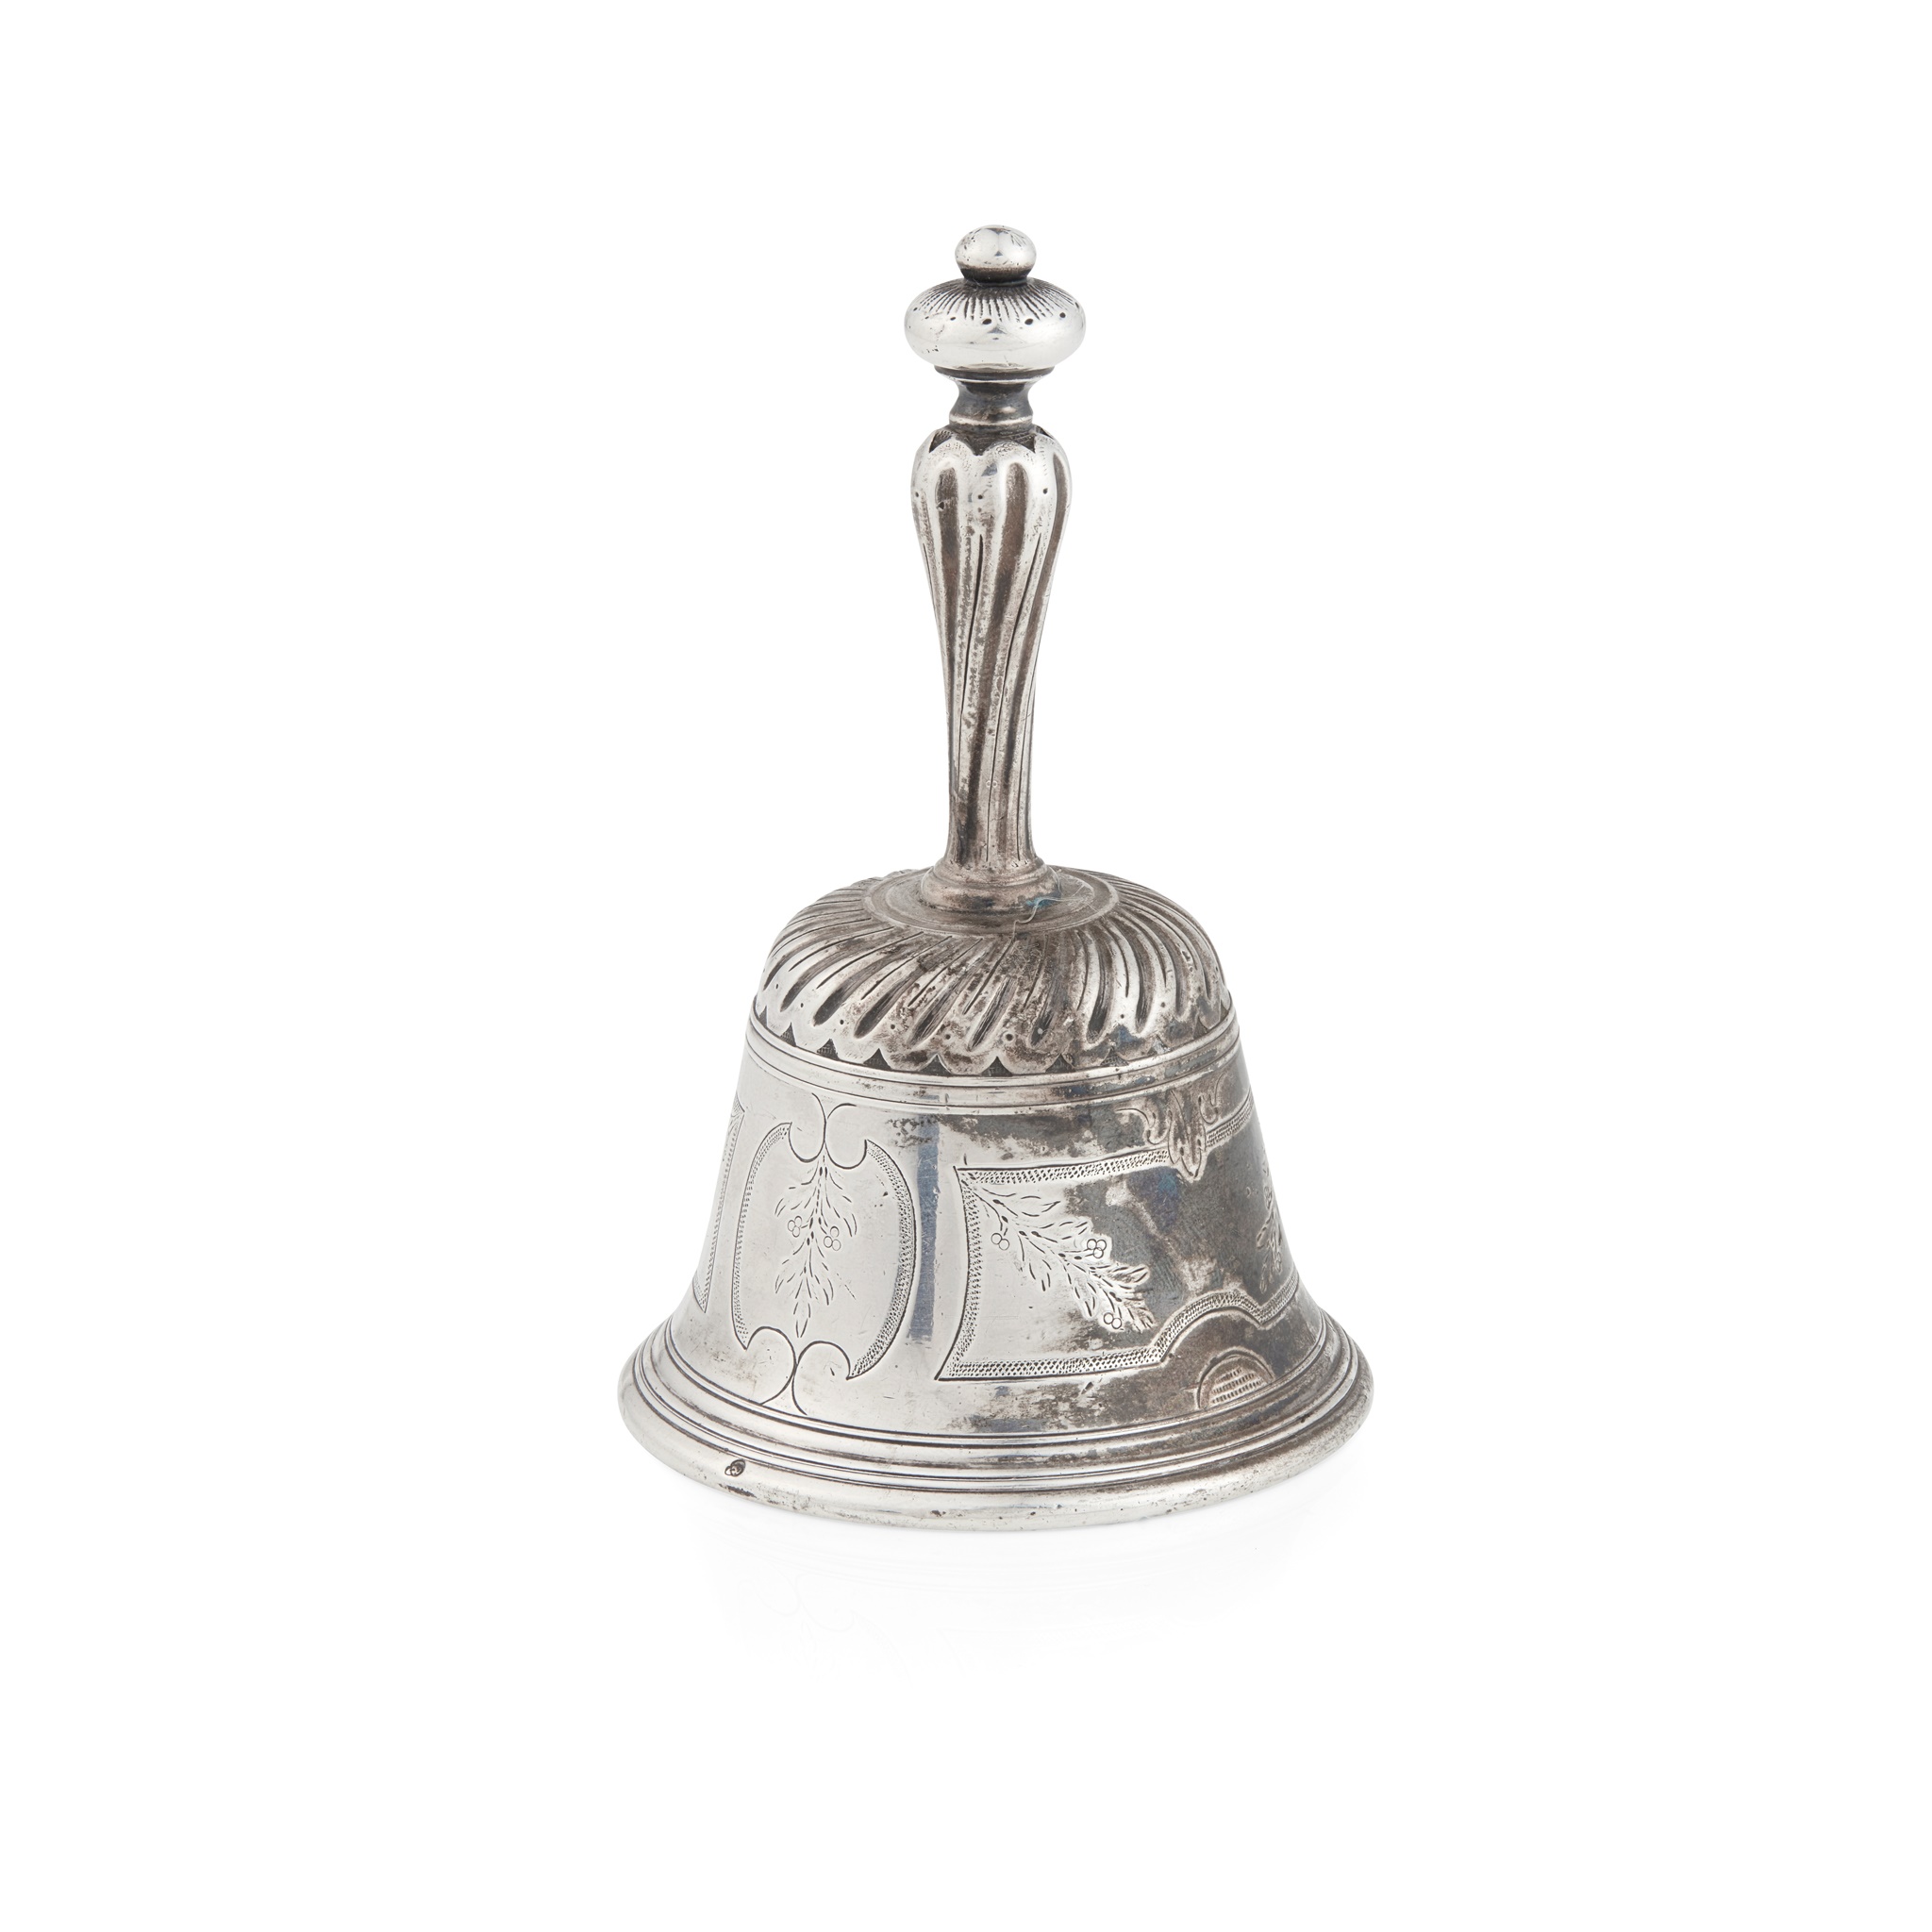 An early 18th-Century French table bell